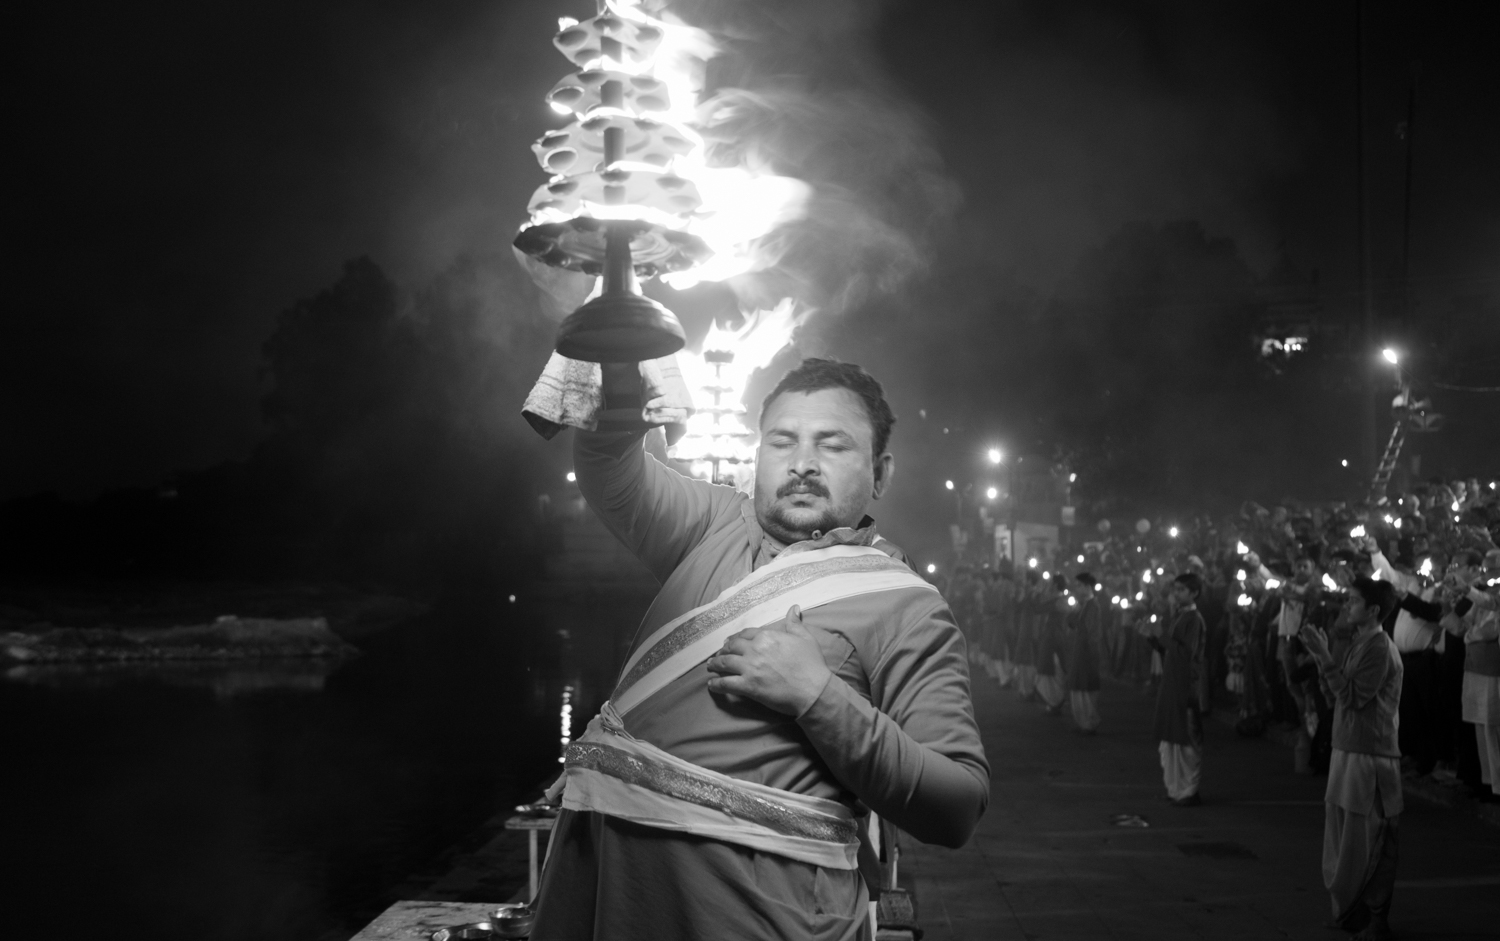 An evening Ganga aarti unfolds at Triveni Ghat, Rishikesh, as hundreds of pilgrims join in.